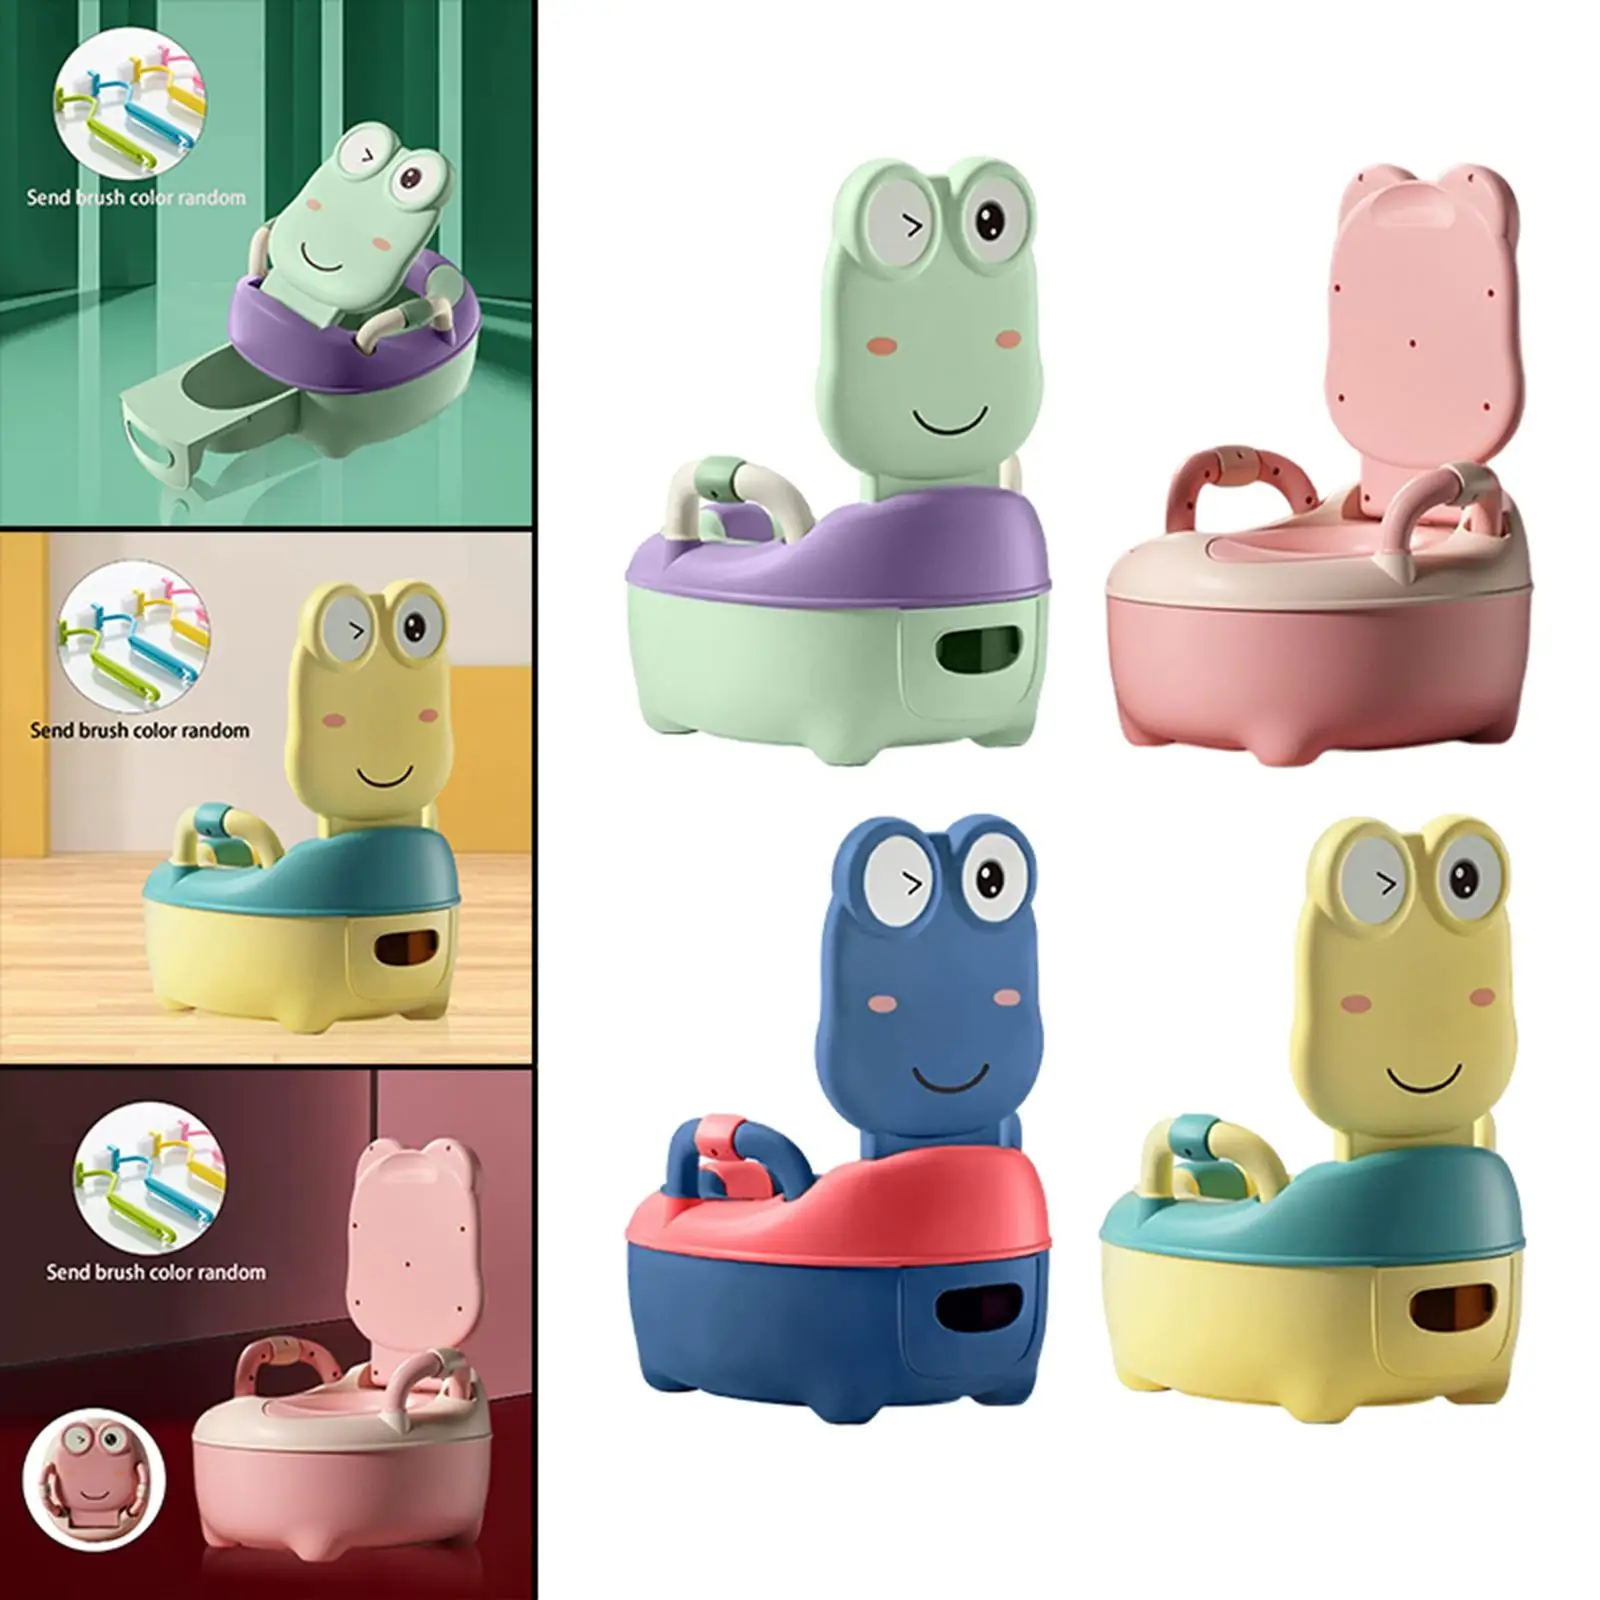 Baby Toilet Seat potty Chair Pot with Handles for Unisex Child